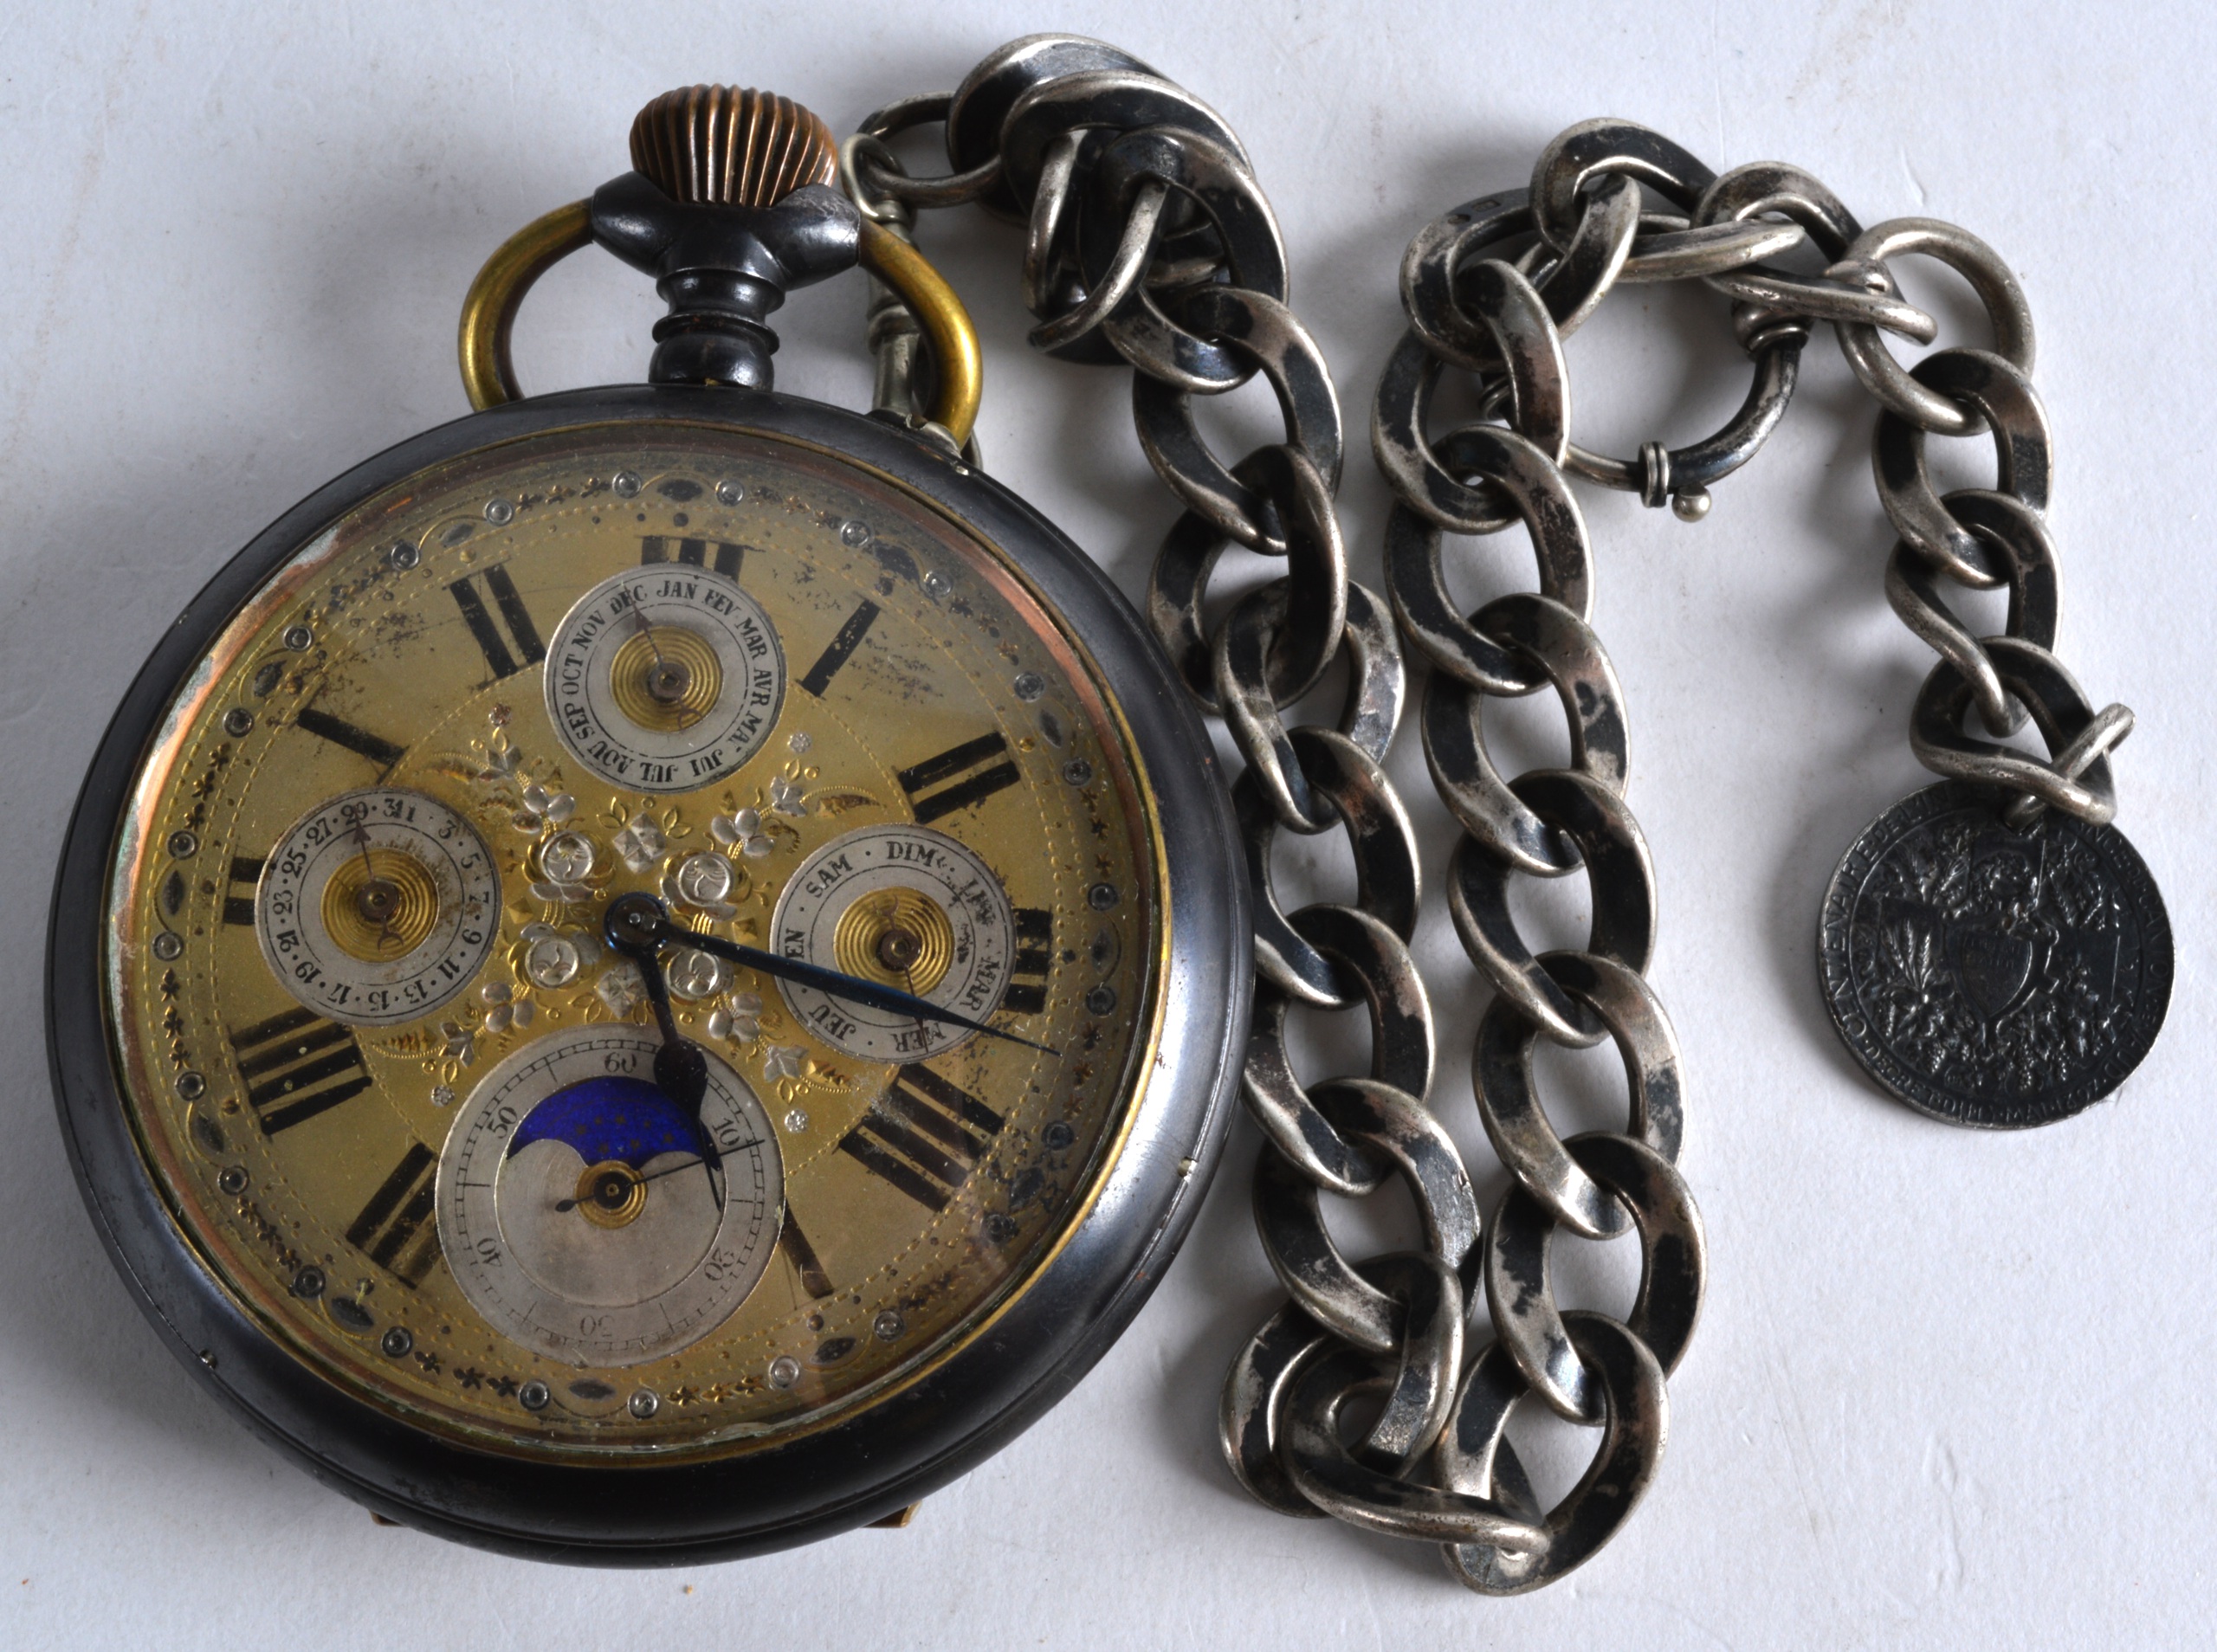 A LARGE 19TH CENTURY GENTLEMANS GOLIATH POCKET WATCH with four subsidiary dials, the white metal